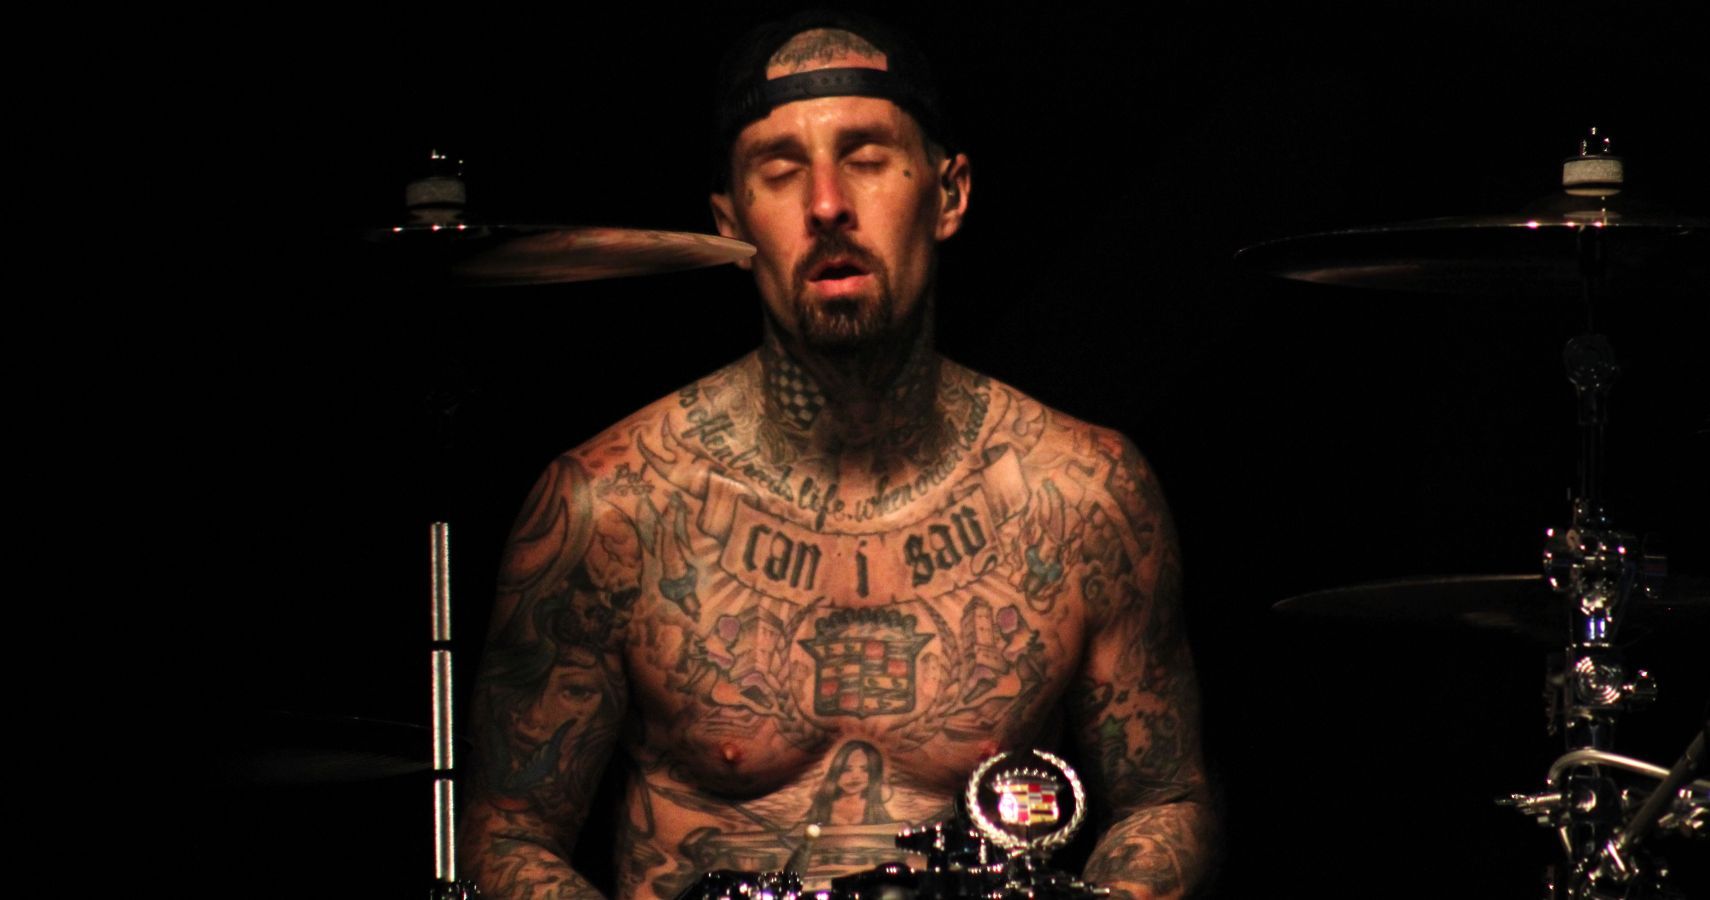 The 8 Most Expensive Things Bought By Travis Barker | TheRichest